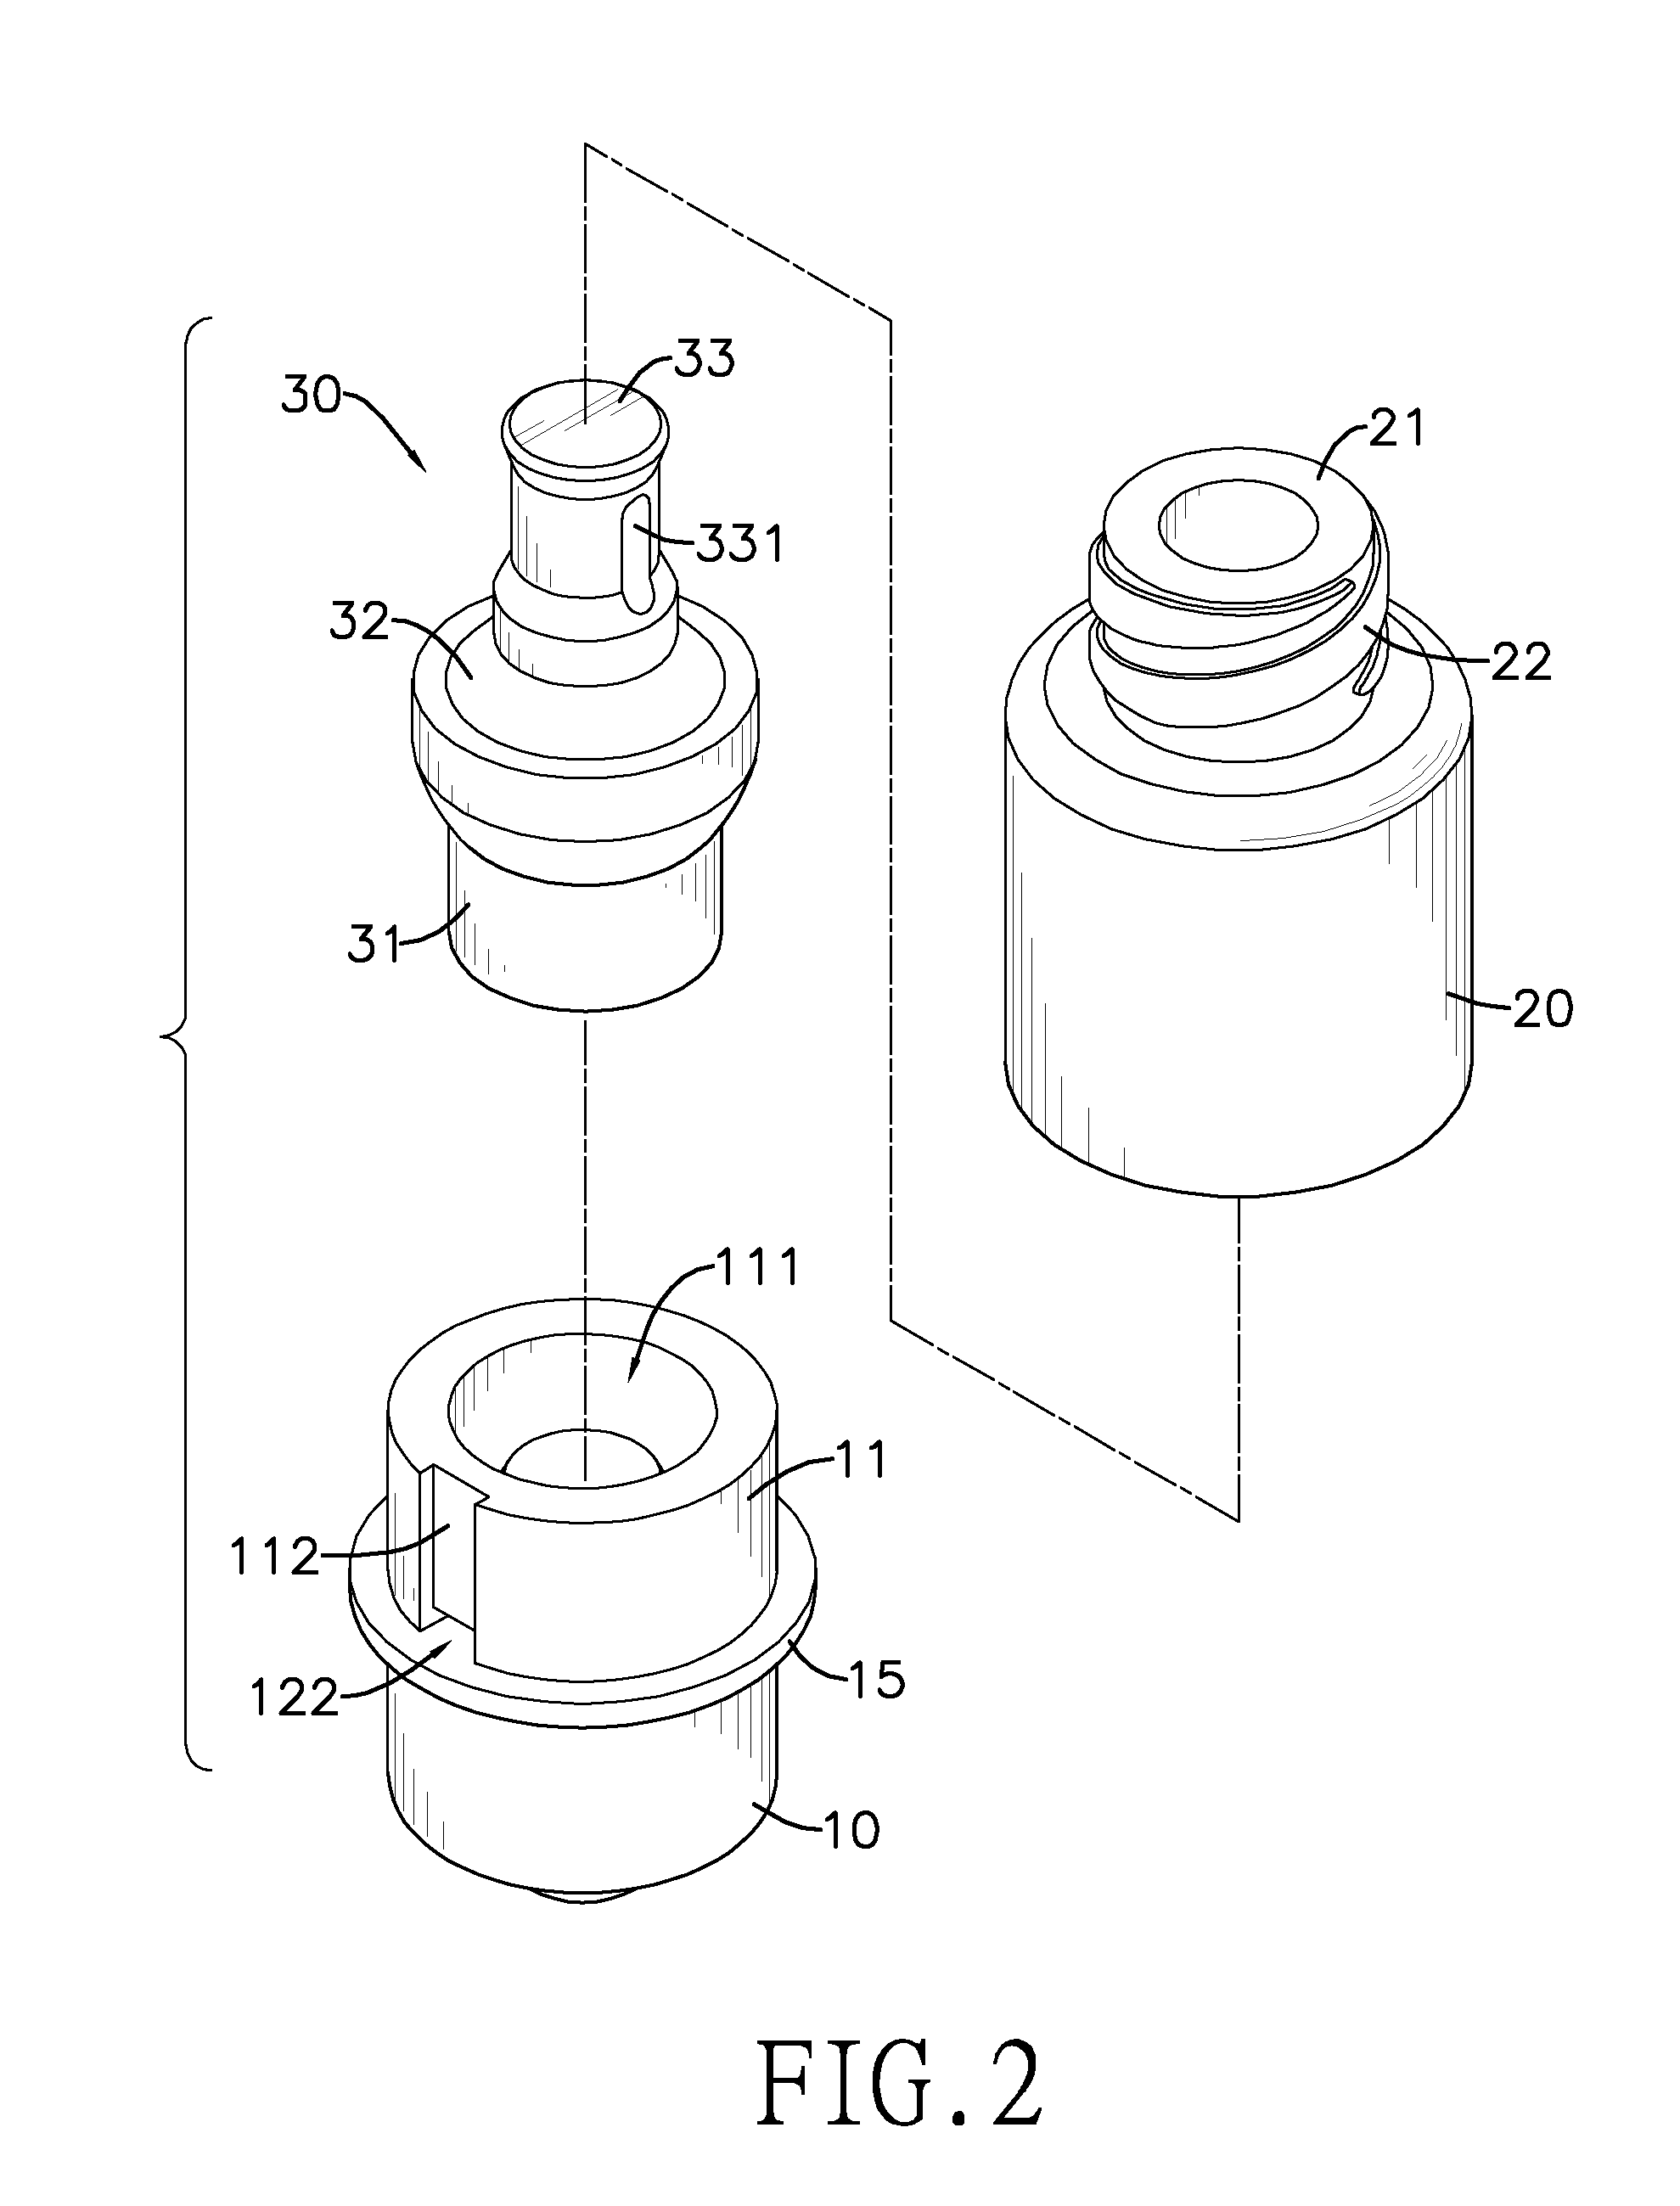 Syringe adapter with a ball-typed valve